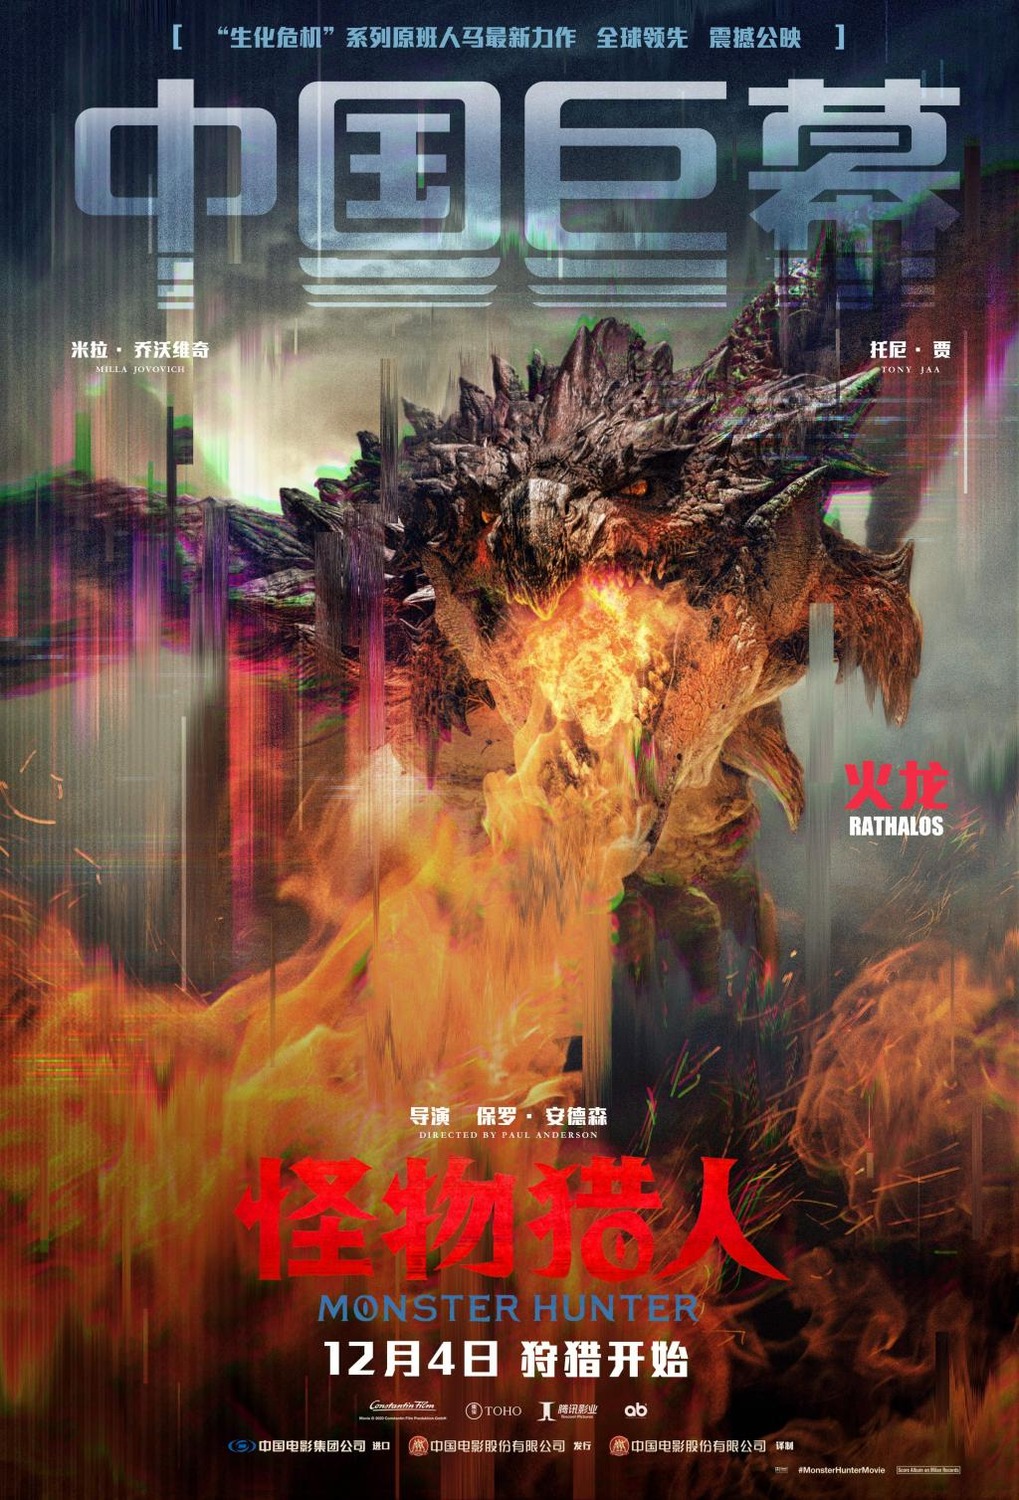 Extra Large Movie Poster Image for Monster Hunter (#12 of 15)